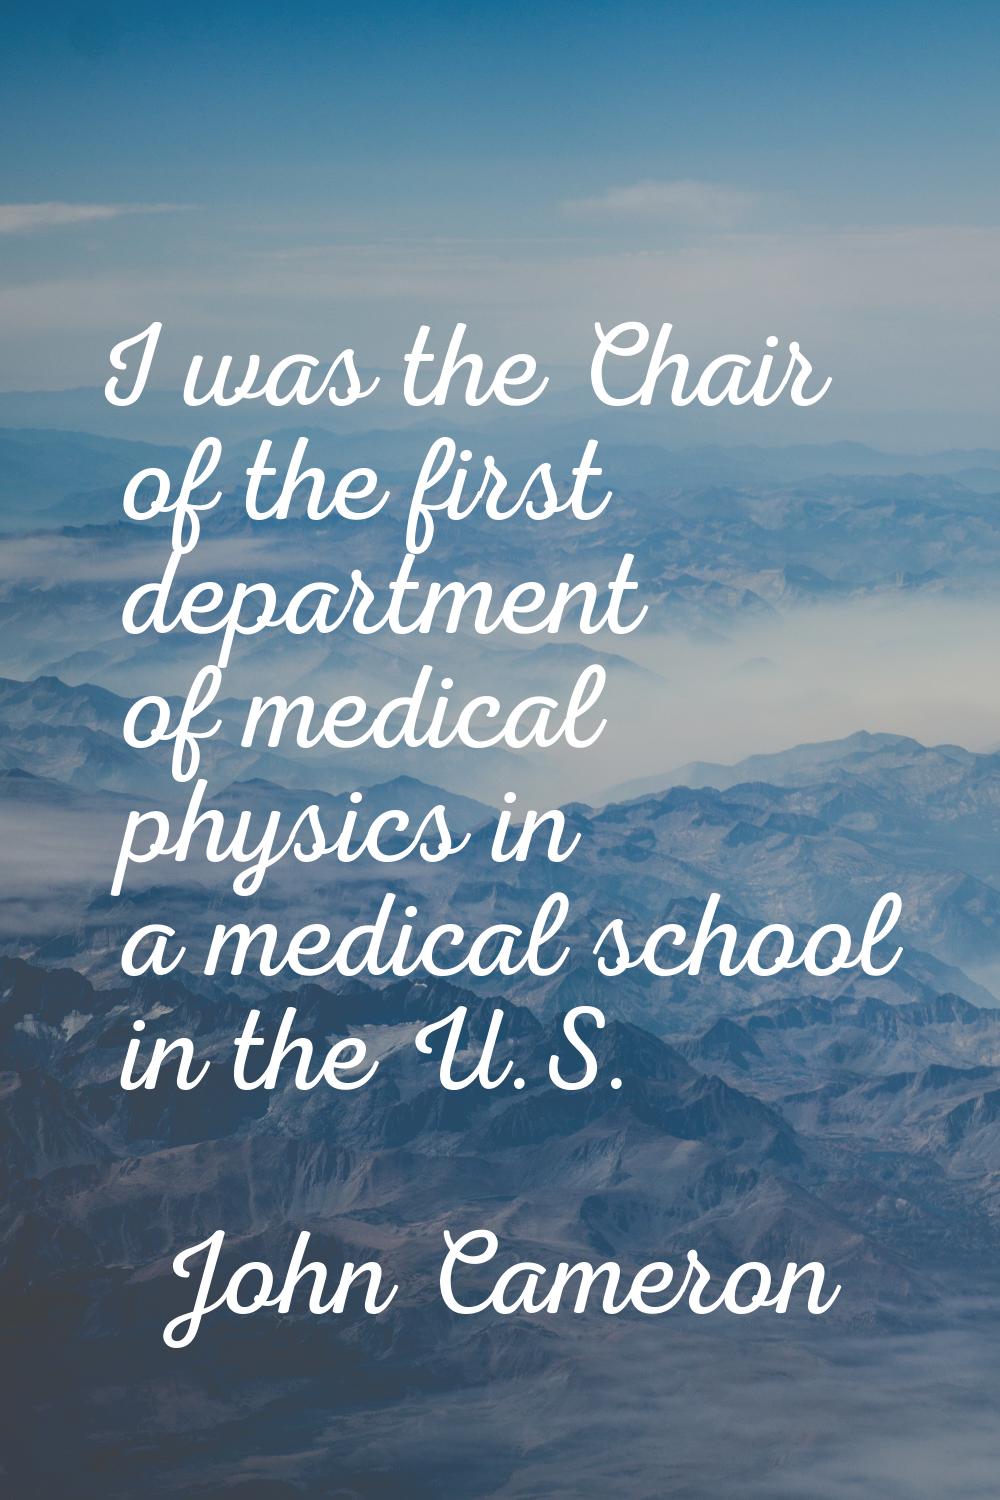 I was the Chair of the first department of medical physics in a medical school in the U.S.